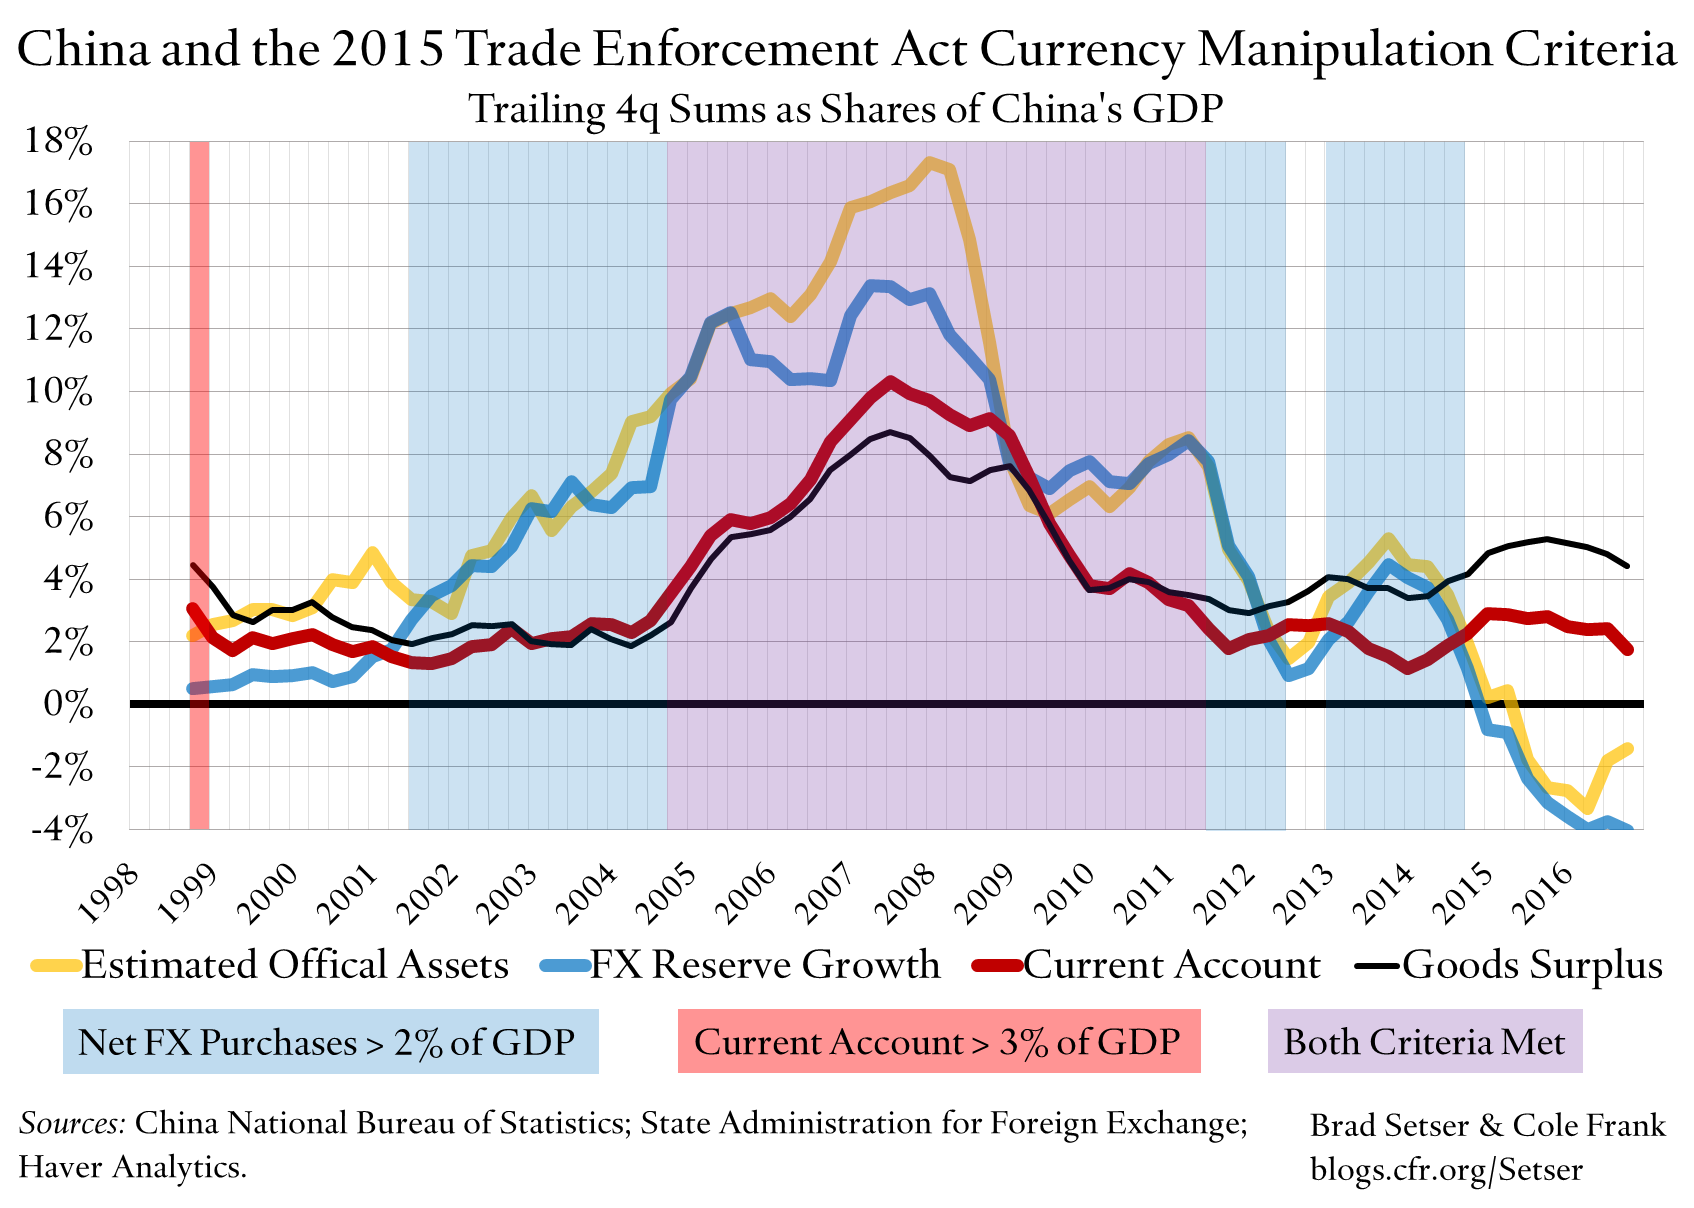 When Did China “Manipulate” Its Currency?